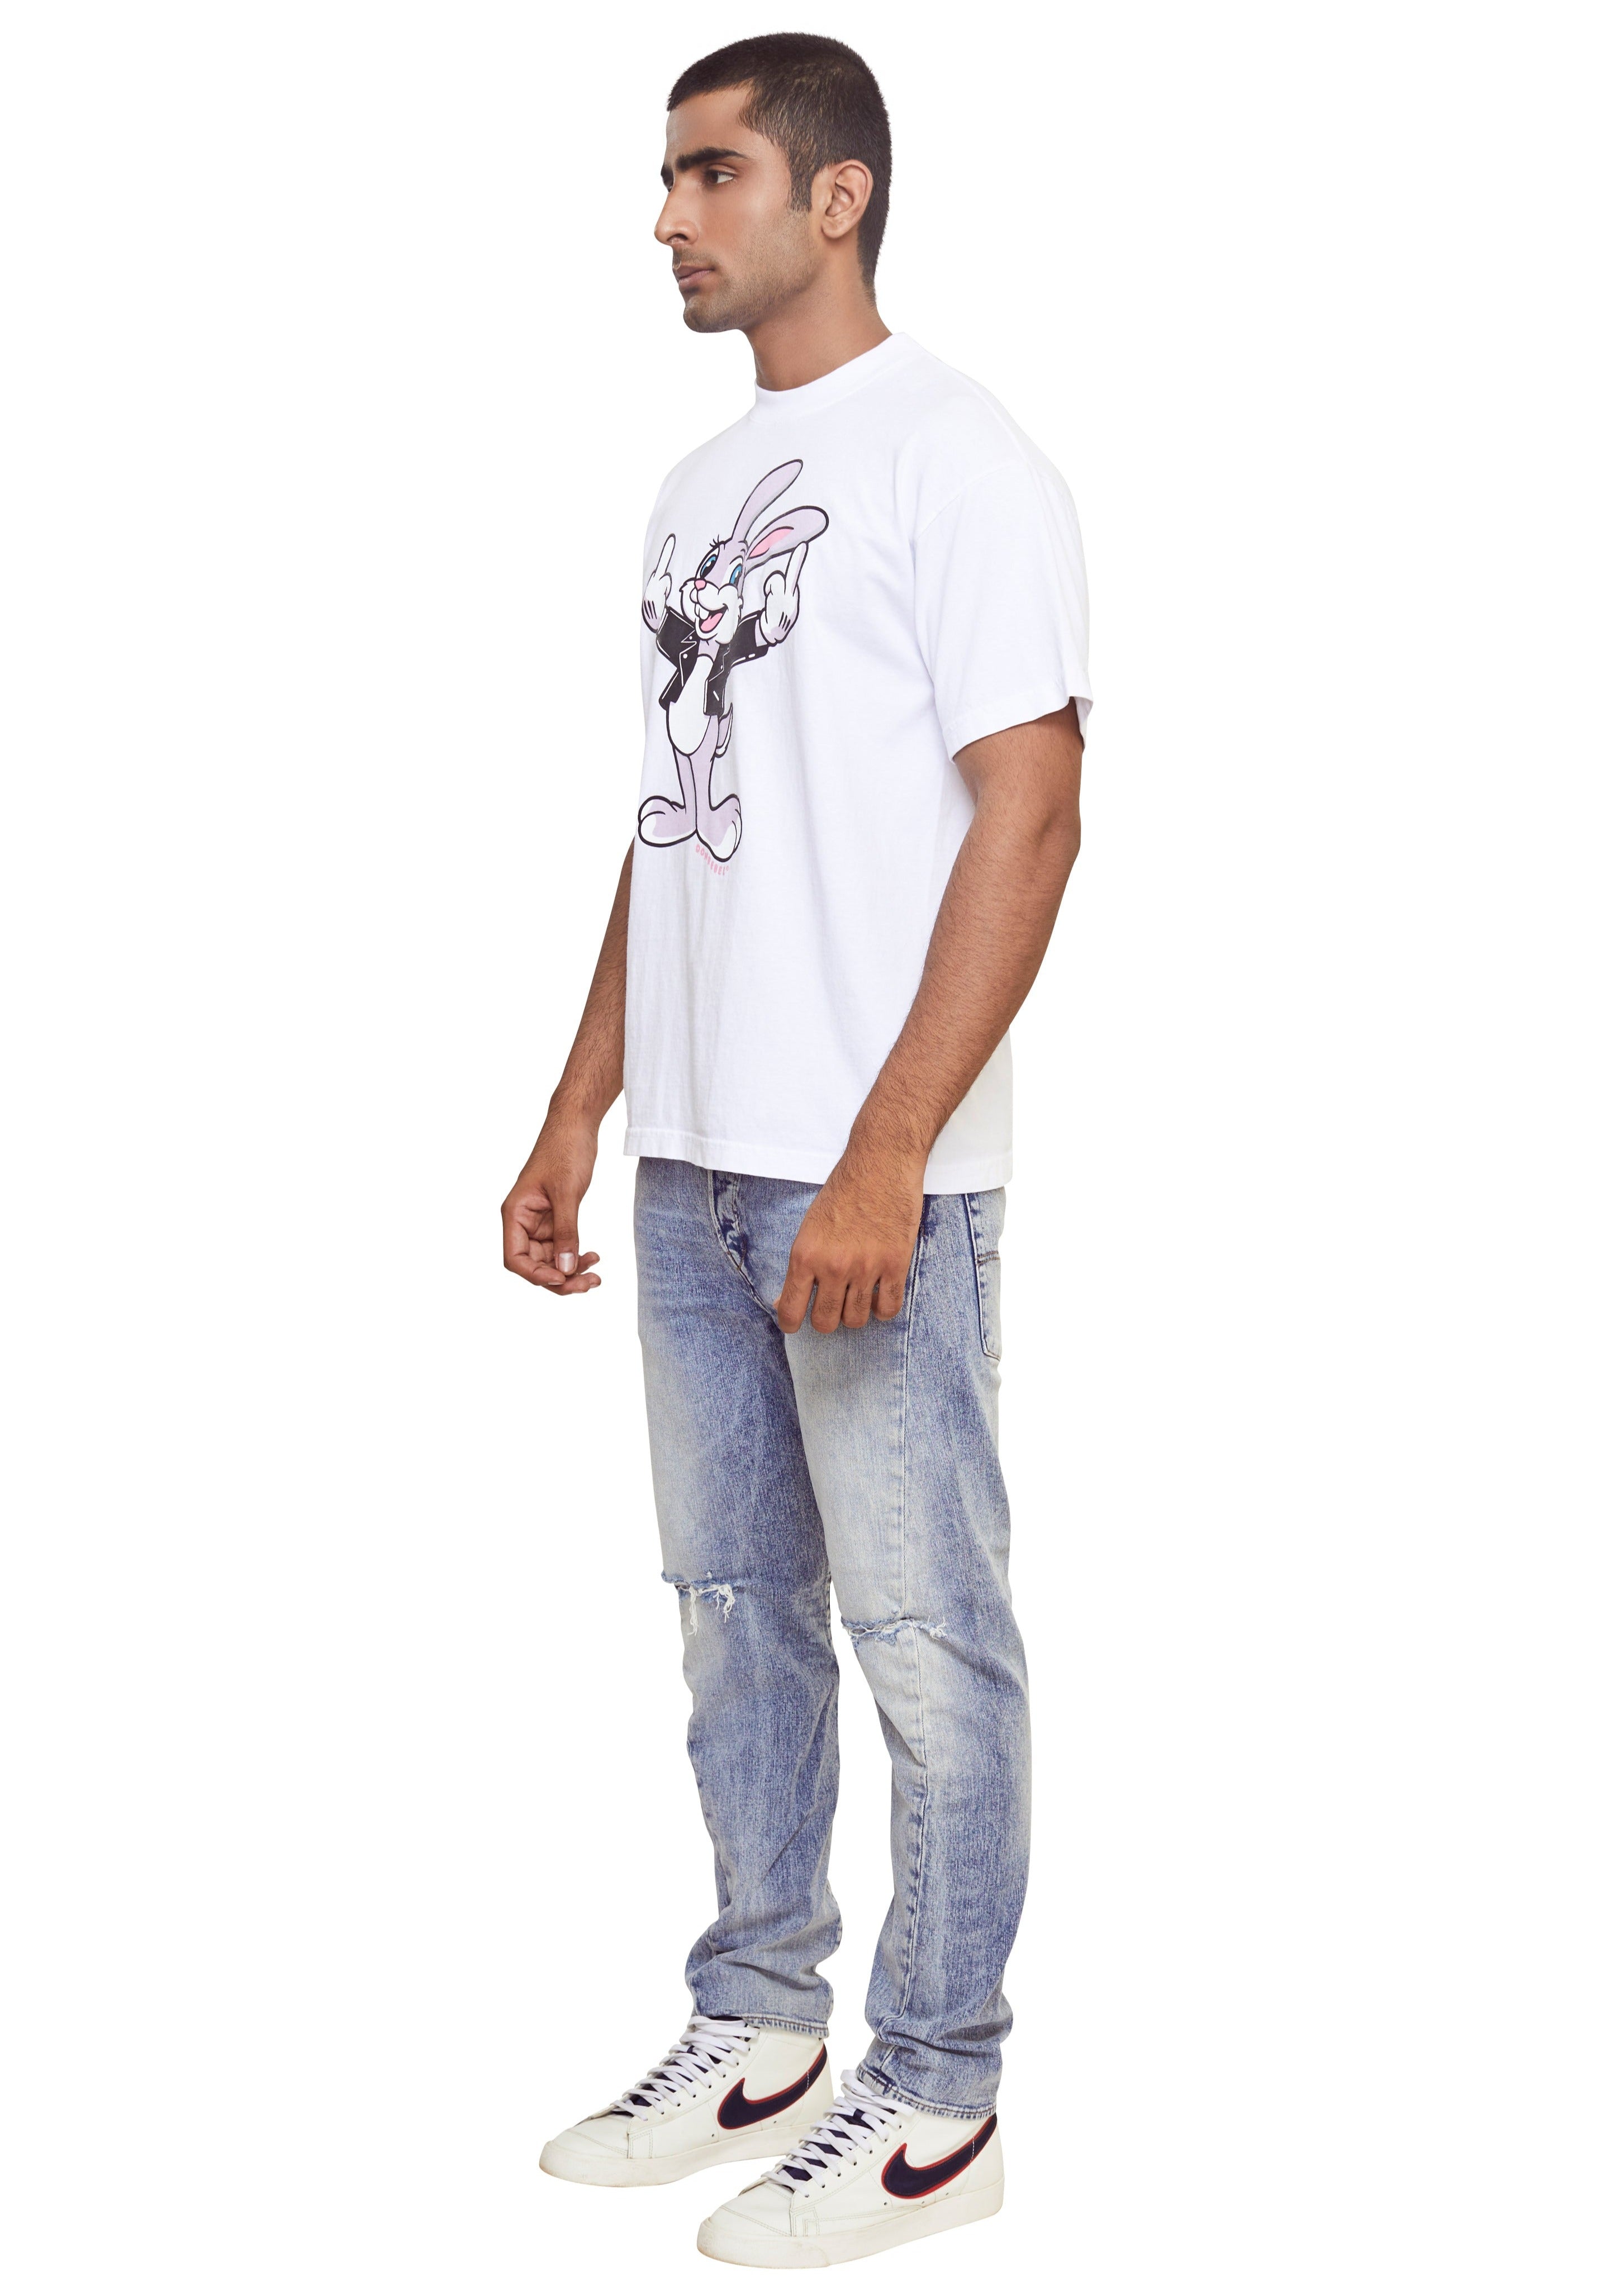 White Rabbit graphic-print distressed cotton T-shirt from the brand Domrebel